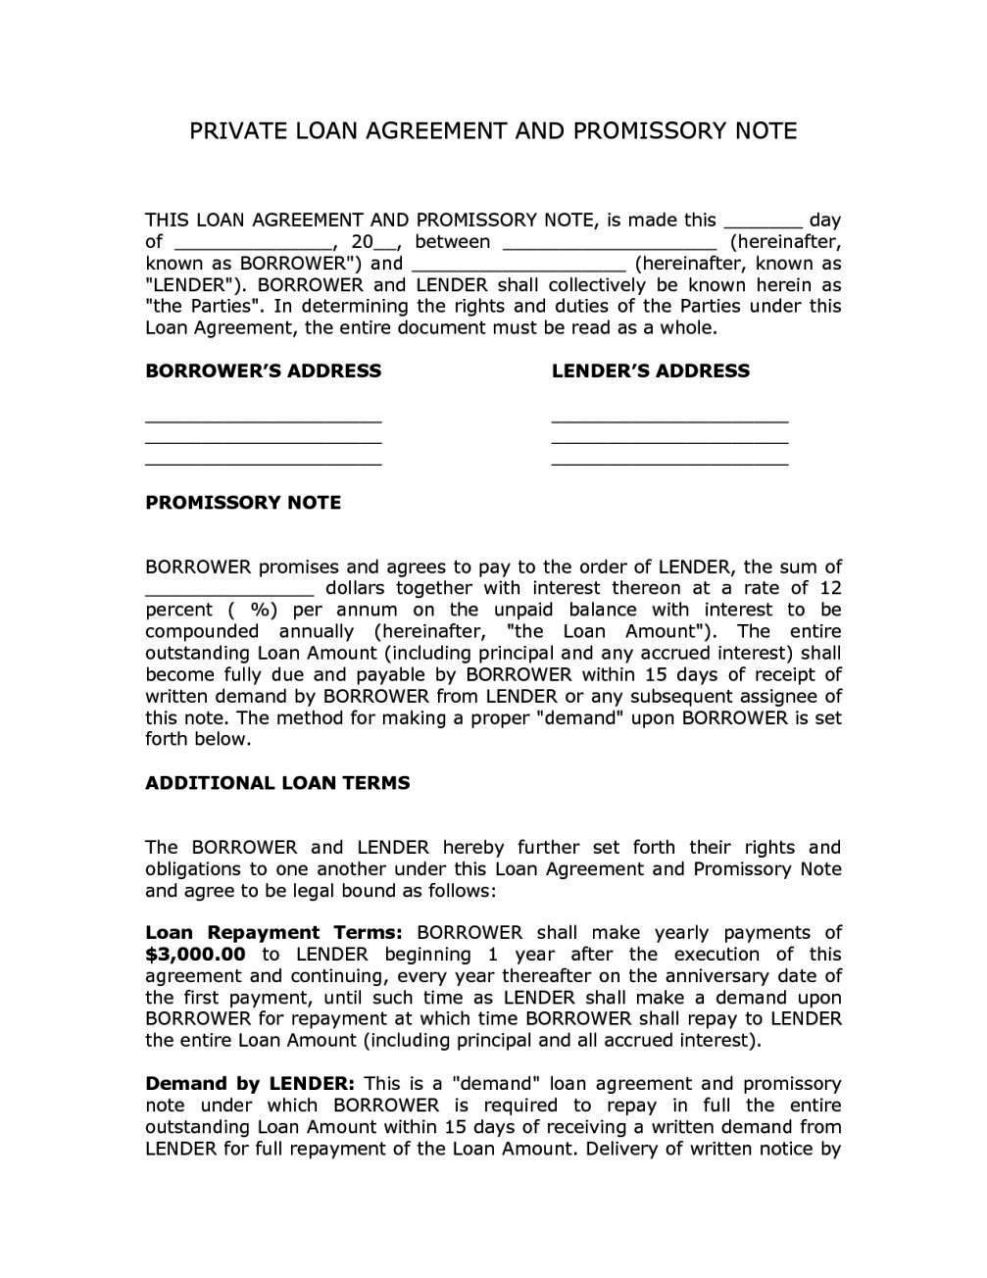 Personal Loan Agreement Contract Template - SampleTemplatess ...